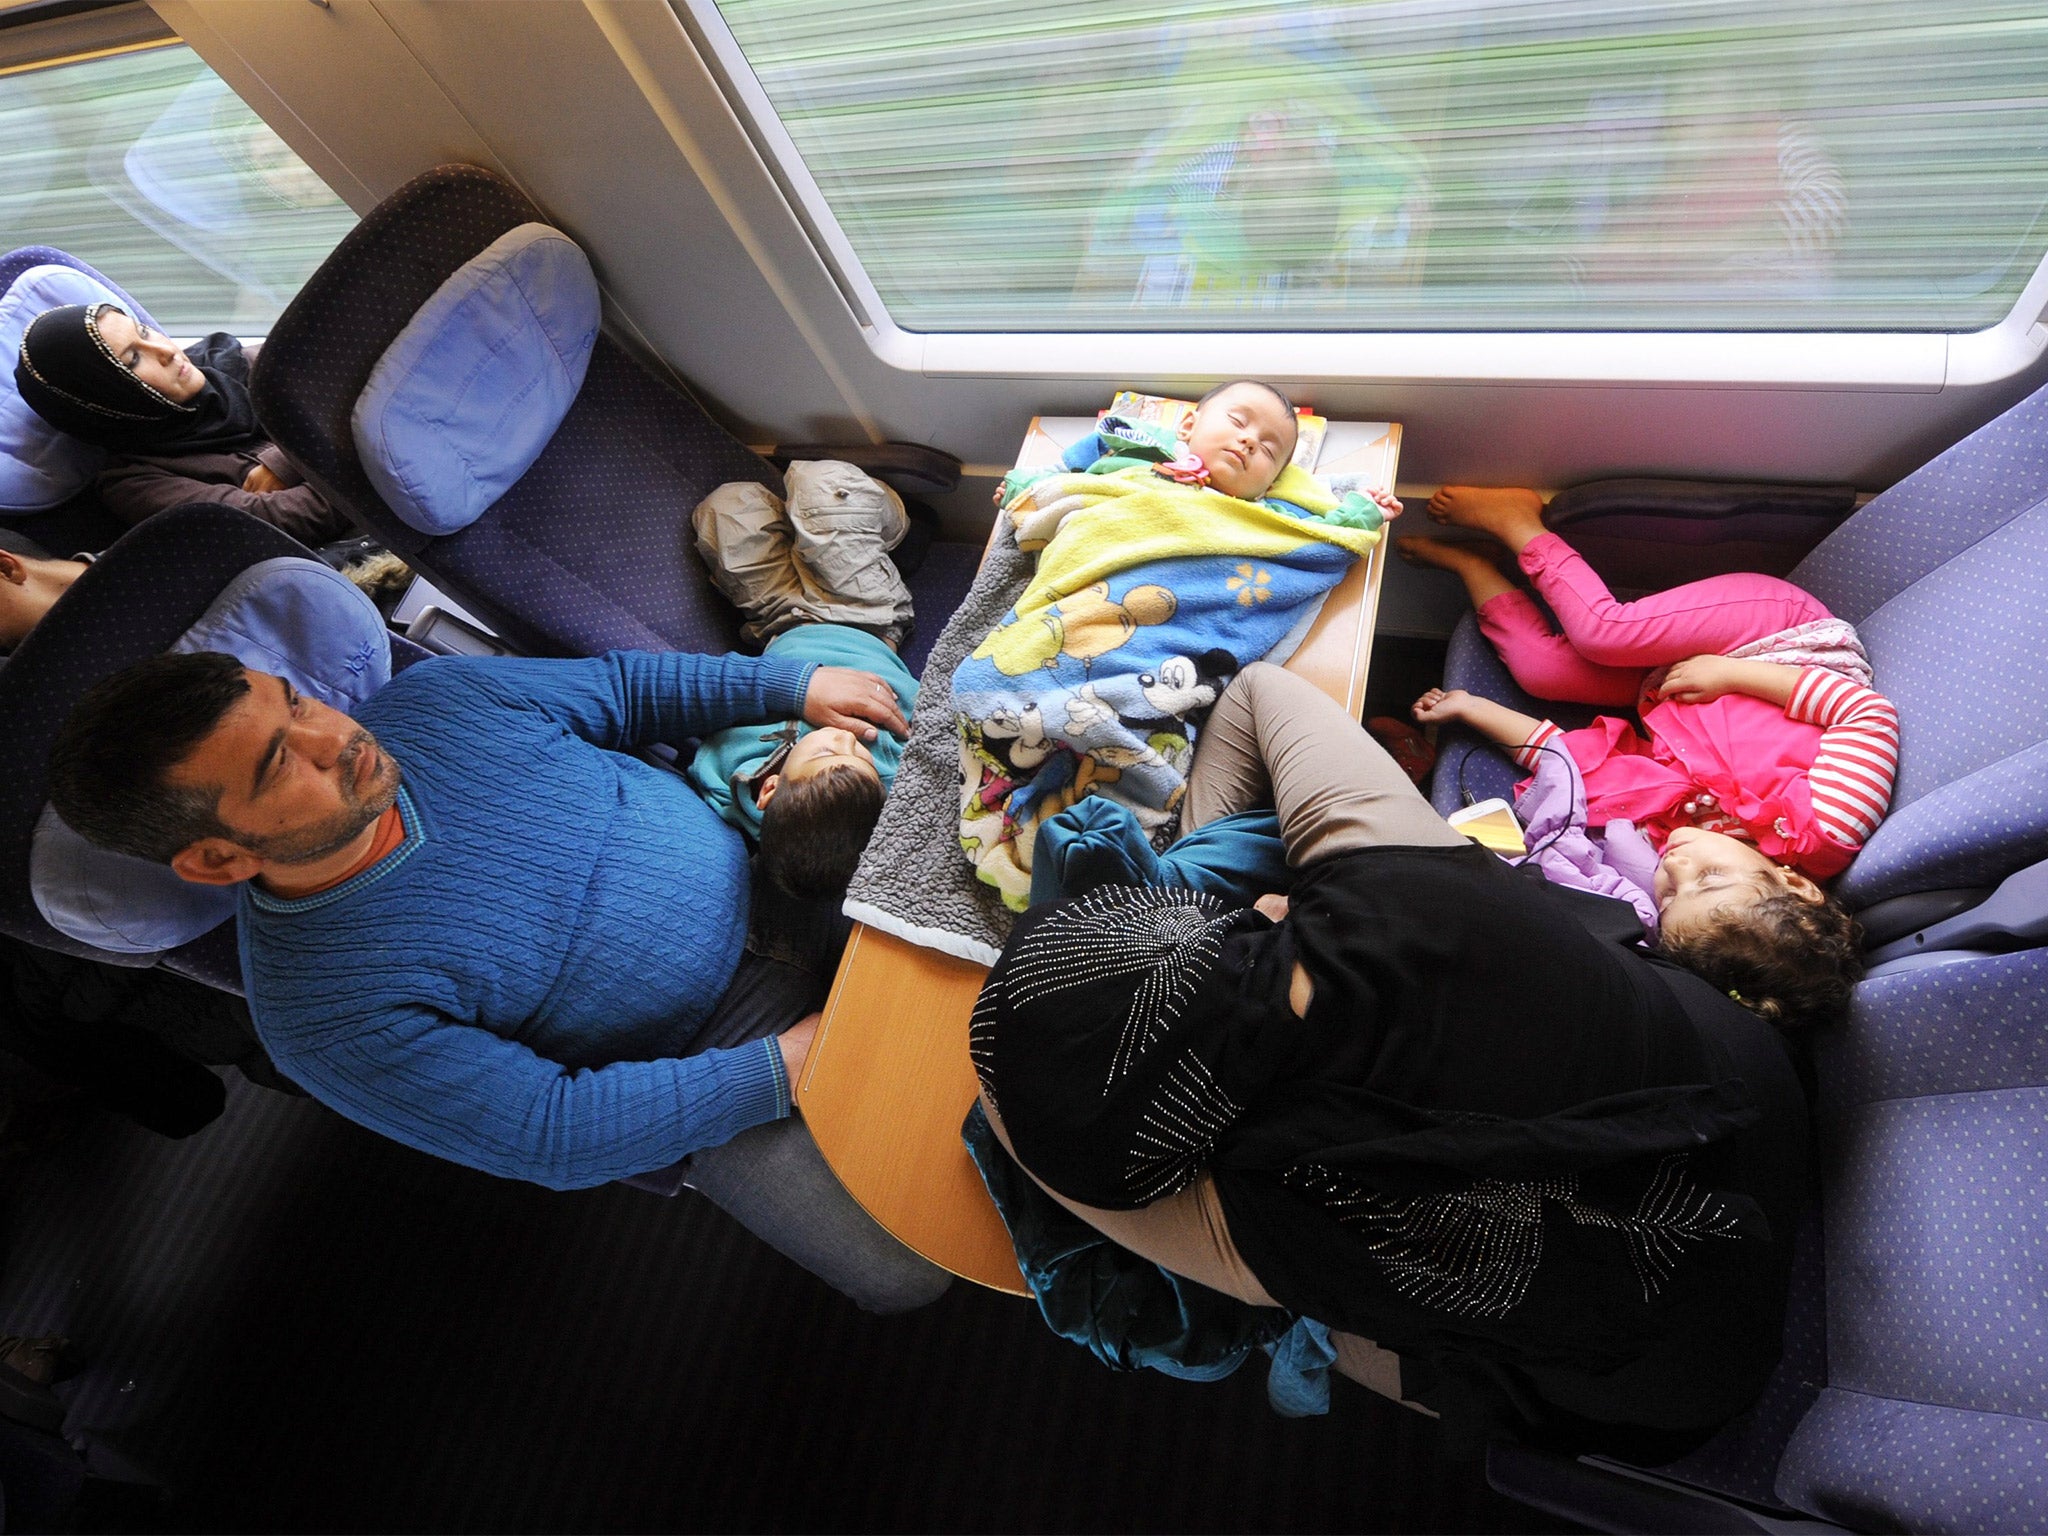 A Syrian family of four travel by train from Vienna to Passau